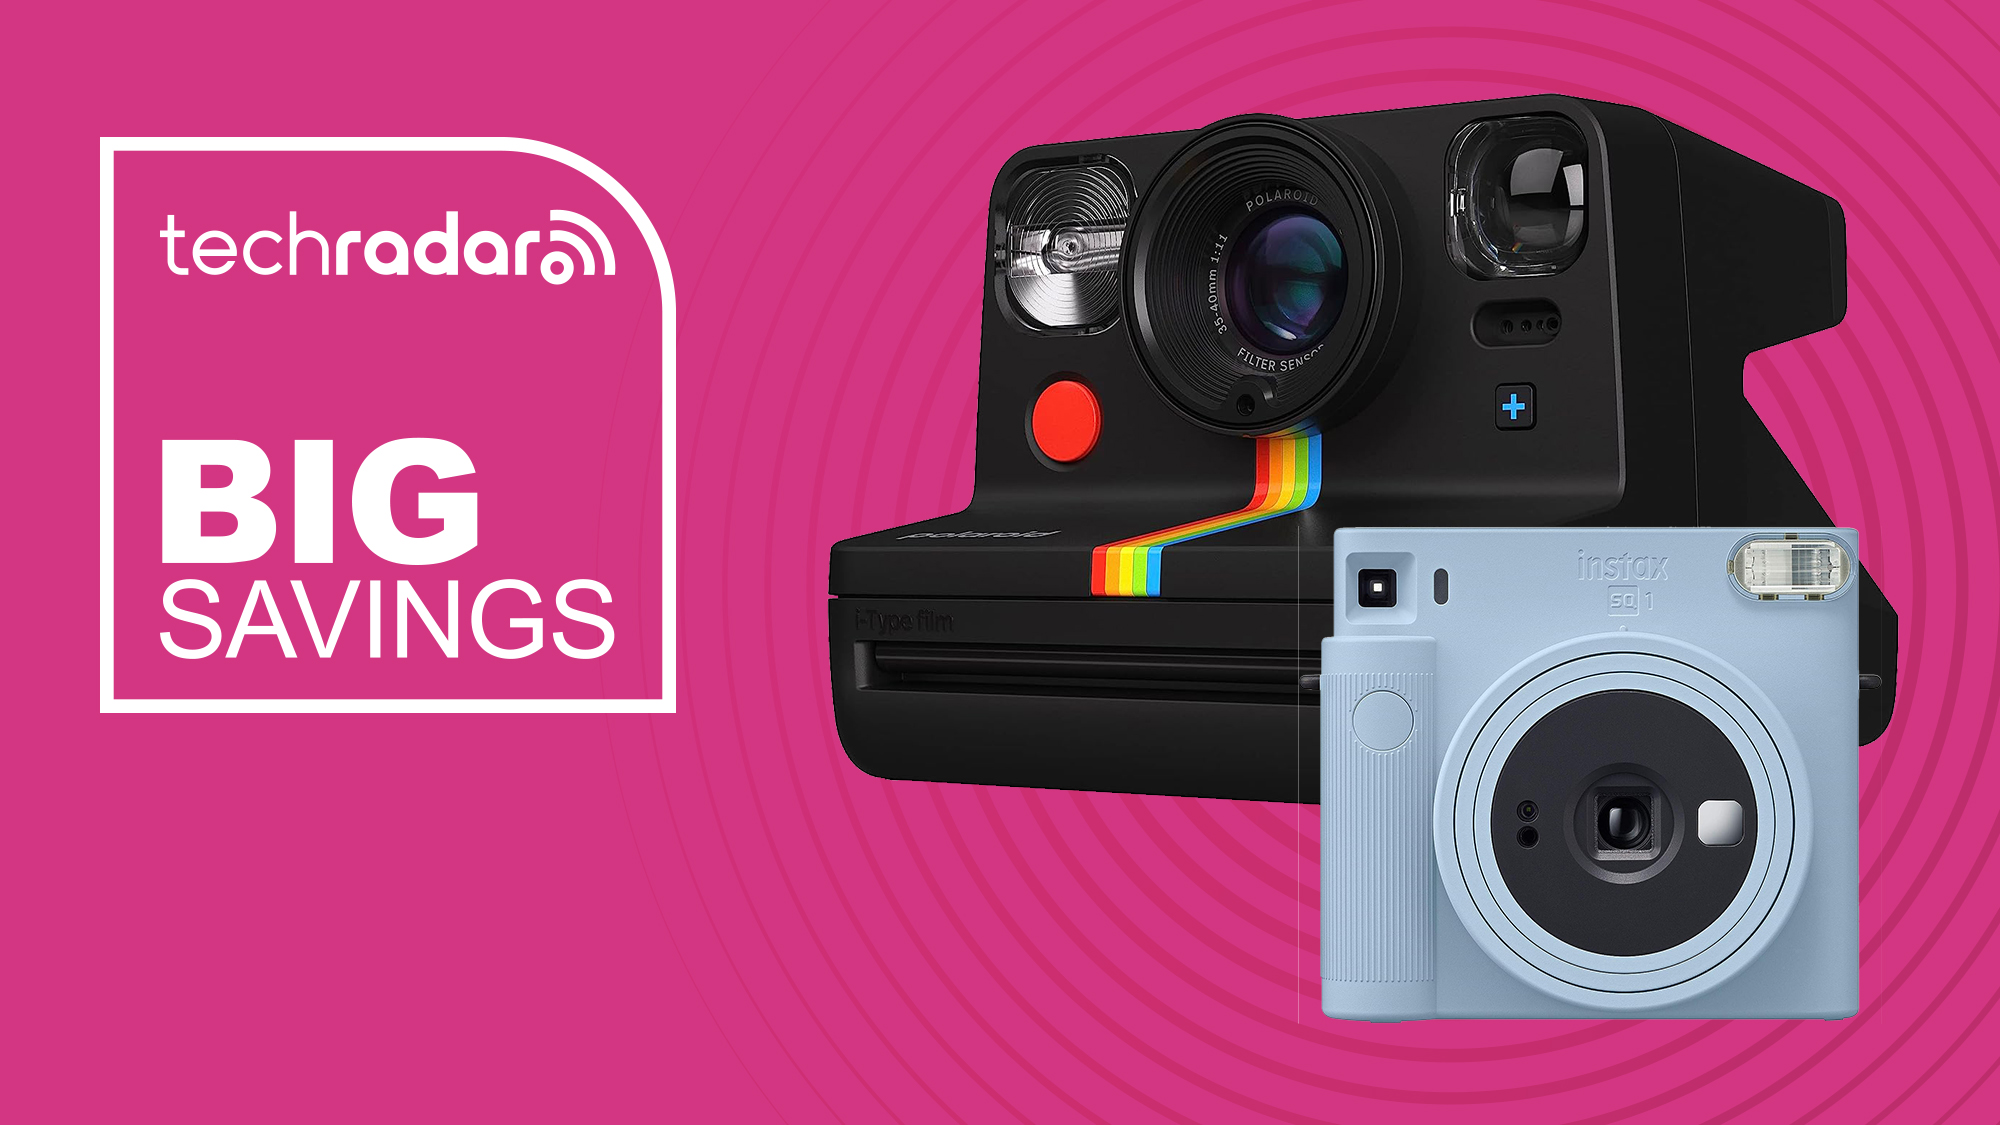 5 instant cameras at instantly great prices this Black Friday | TechRadar